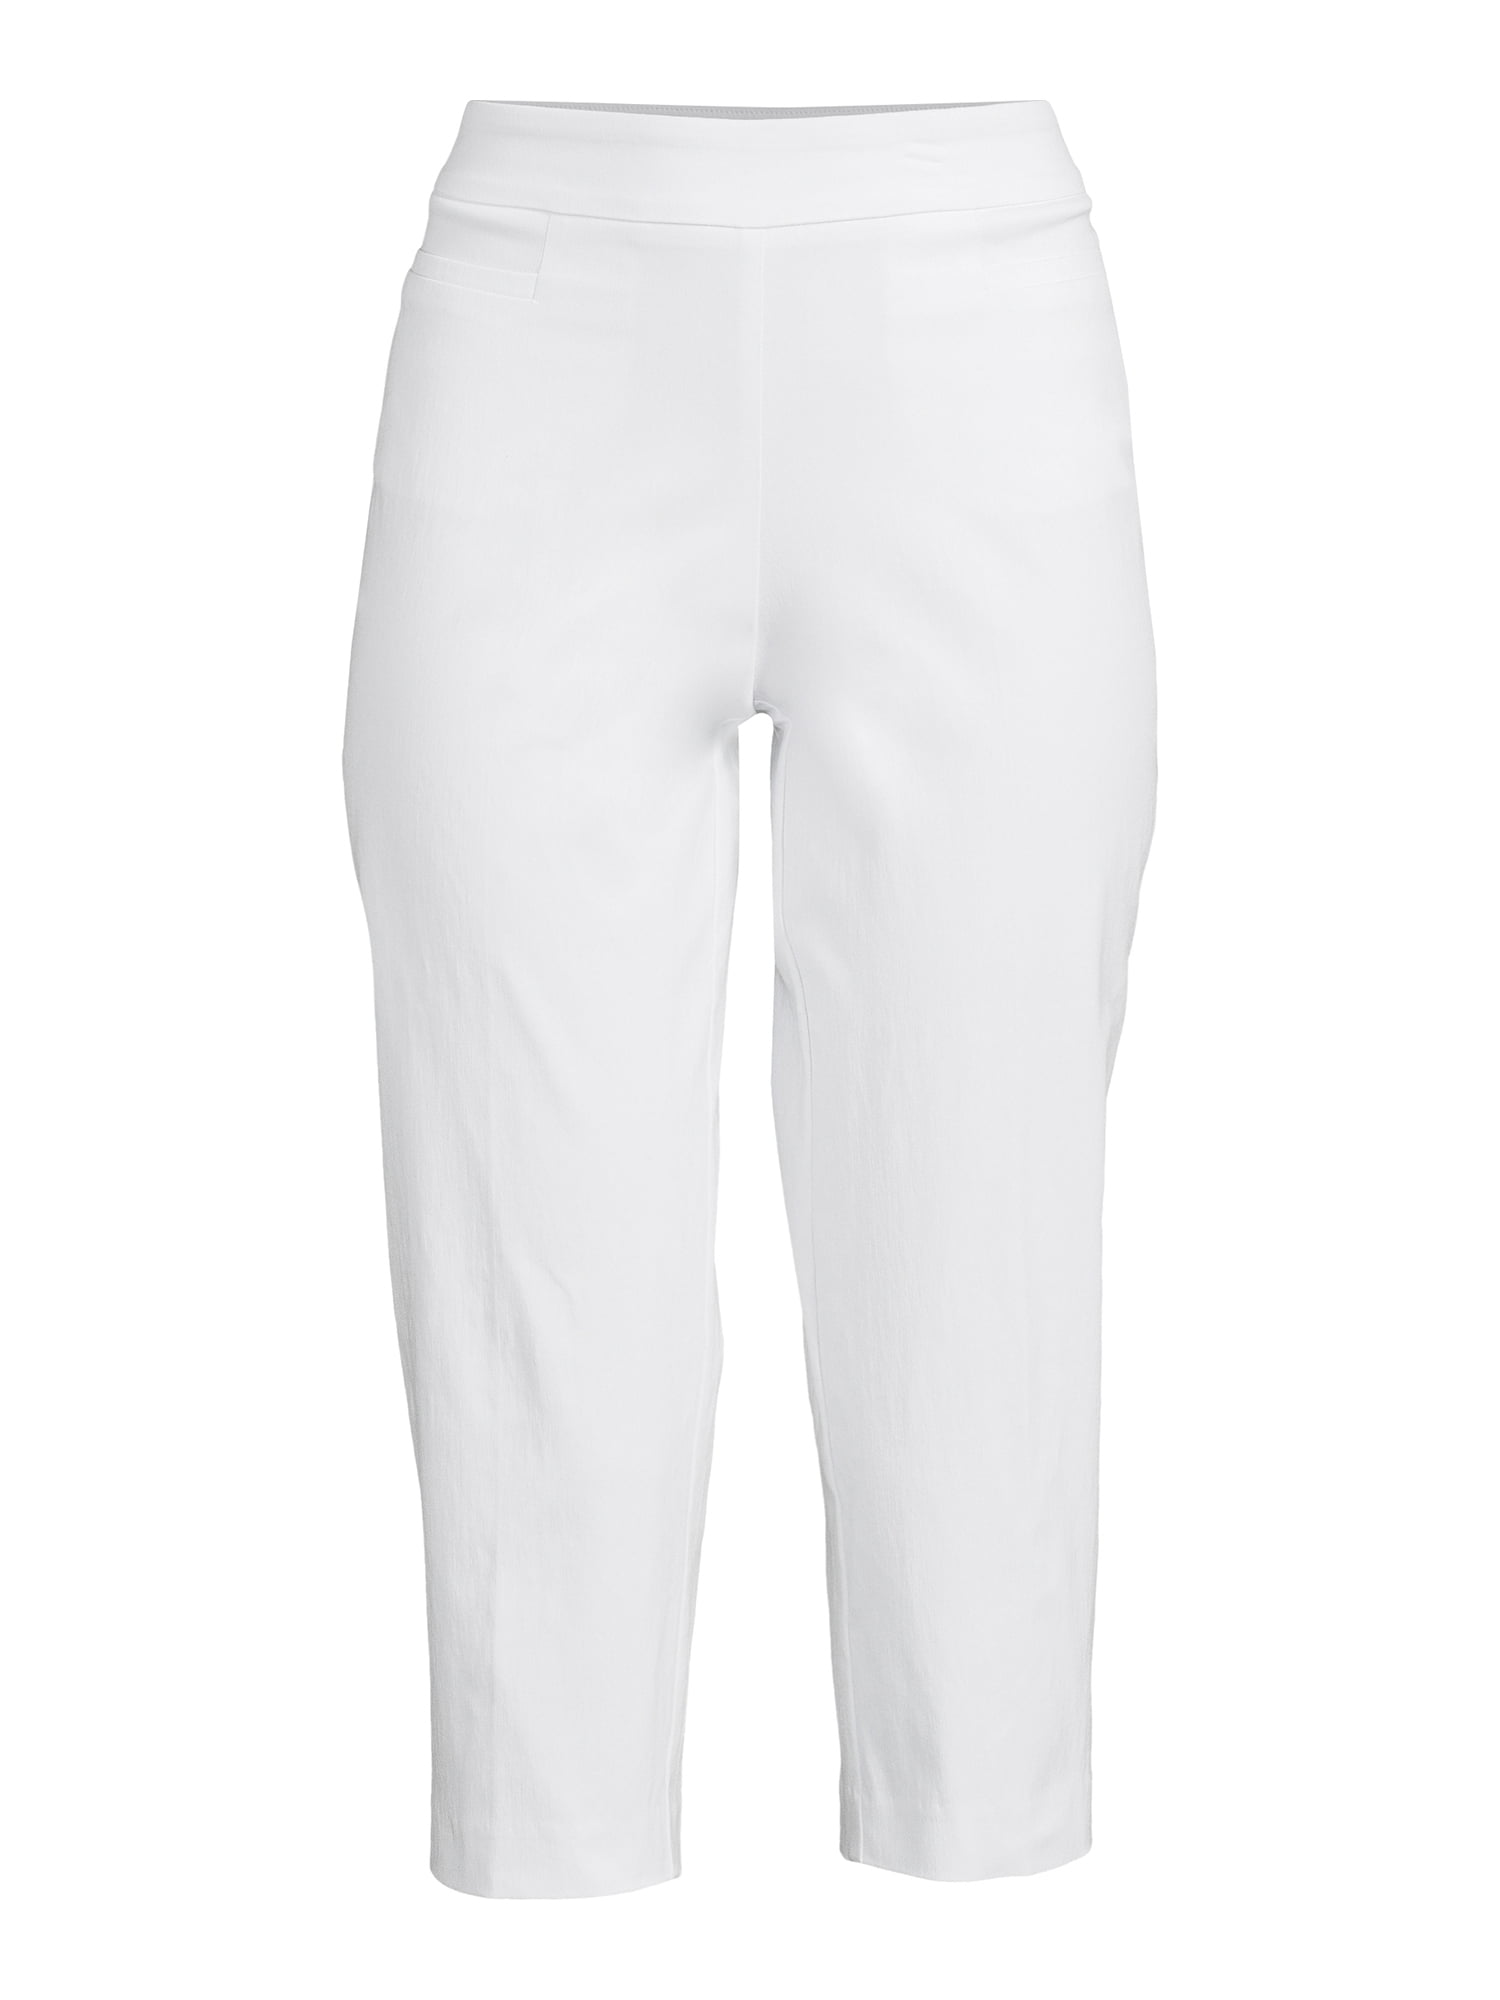 Time and Tru, women's fitted stretch capri pants, XL (16-18), white, new,  with